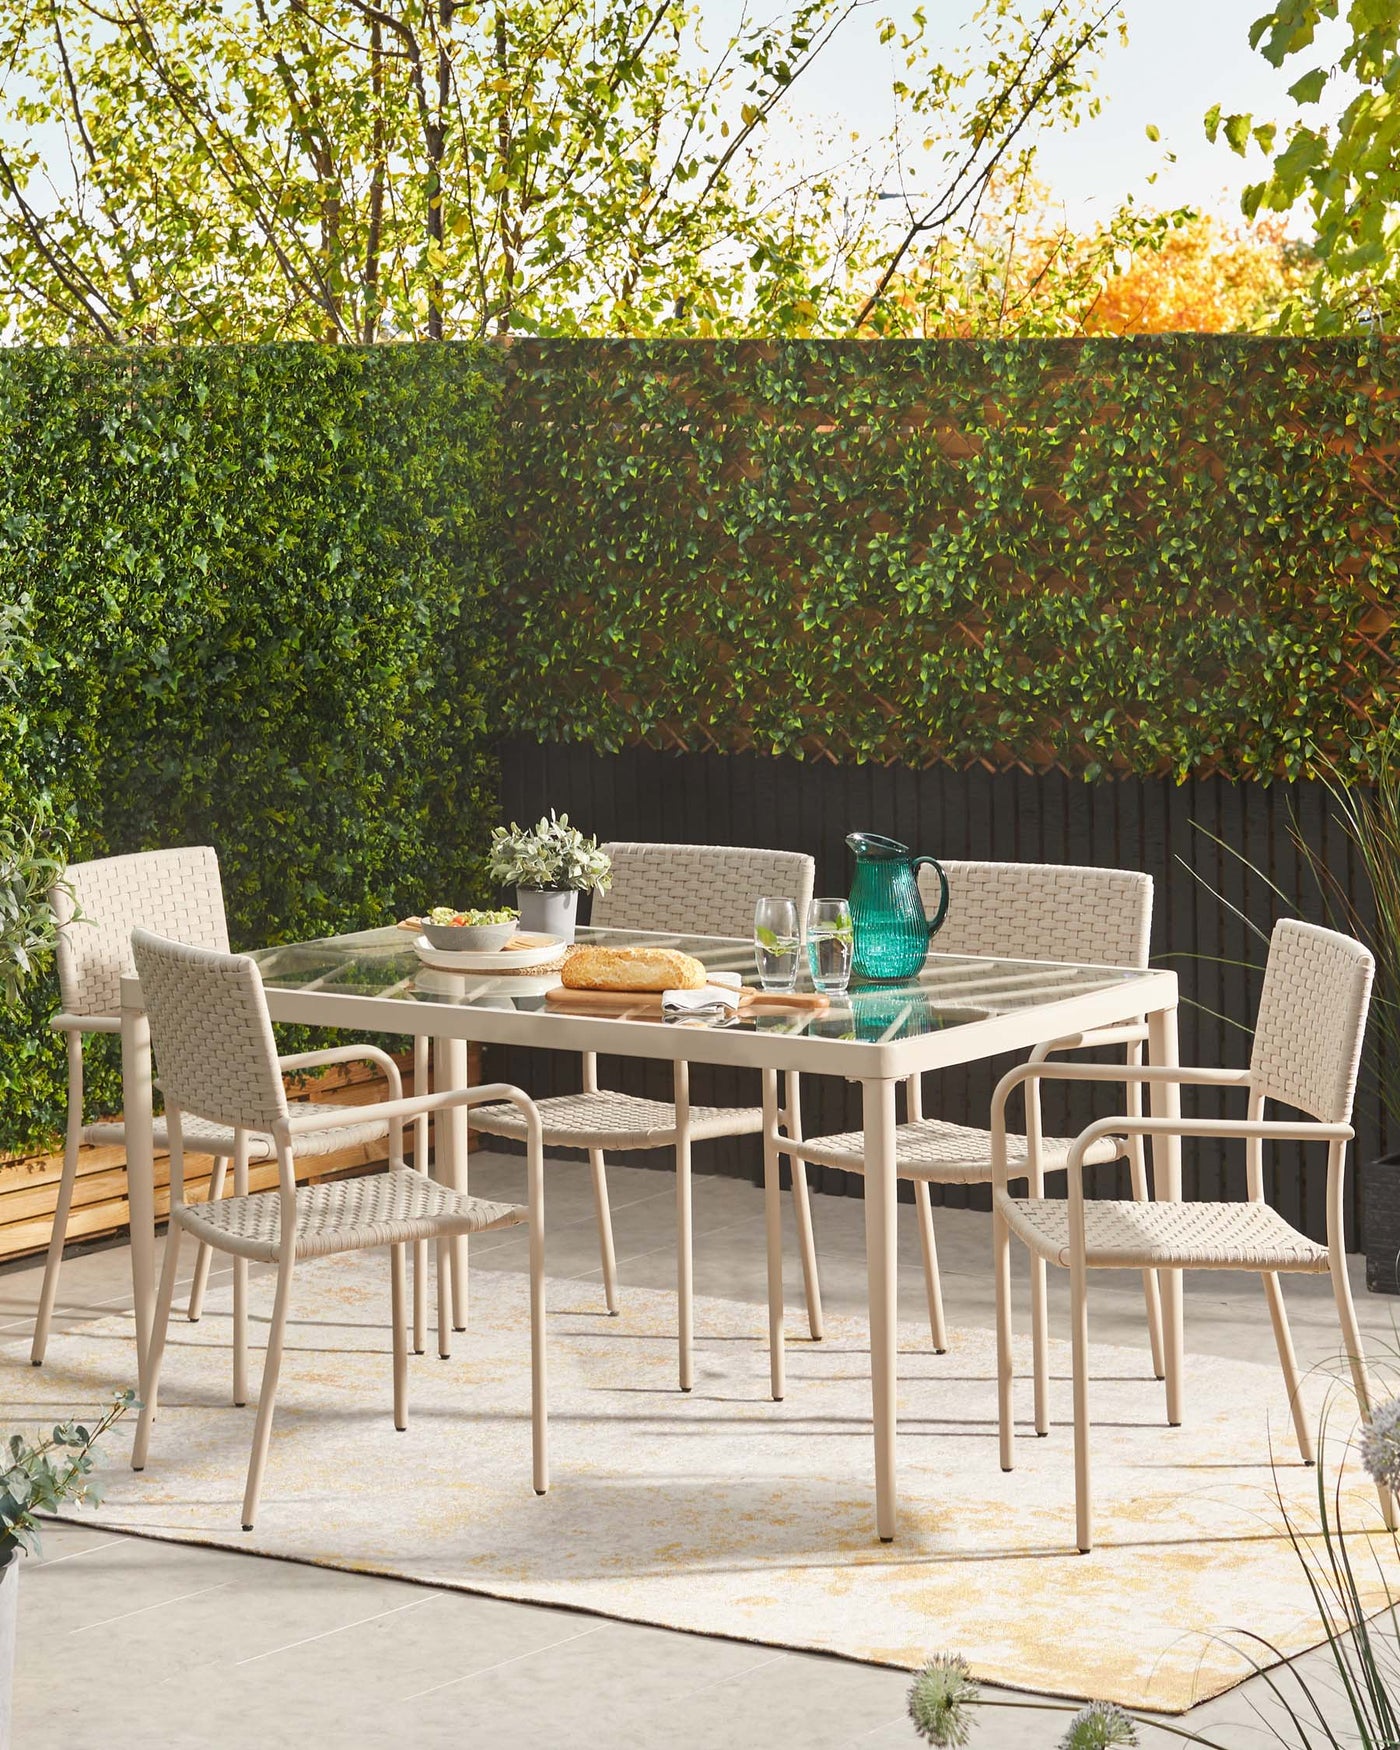 Modern outdoor dining furniture set consisting of a rectangle glass-topped table with beige metal frame and four matching armchairs with woven seat and backrest in a light, neutral tone. The set is arranged on an outdoor patio with a natural backdrop.